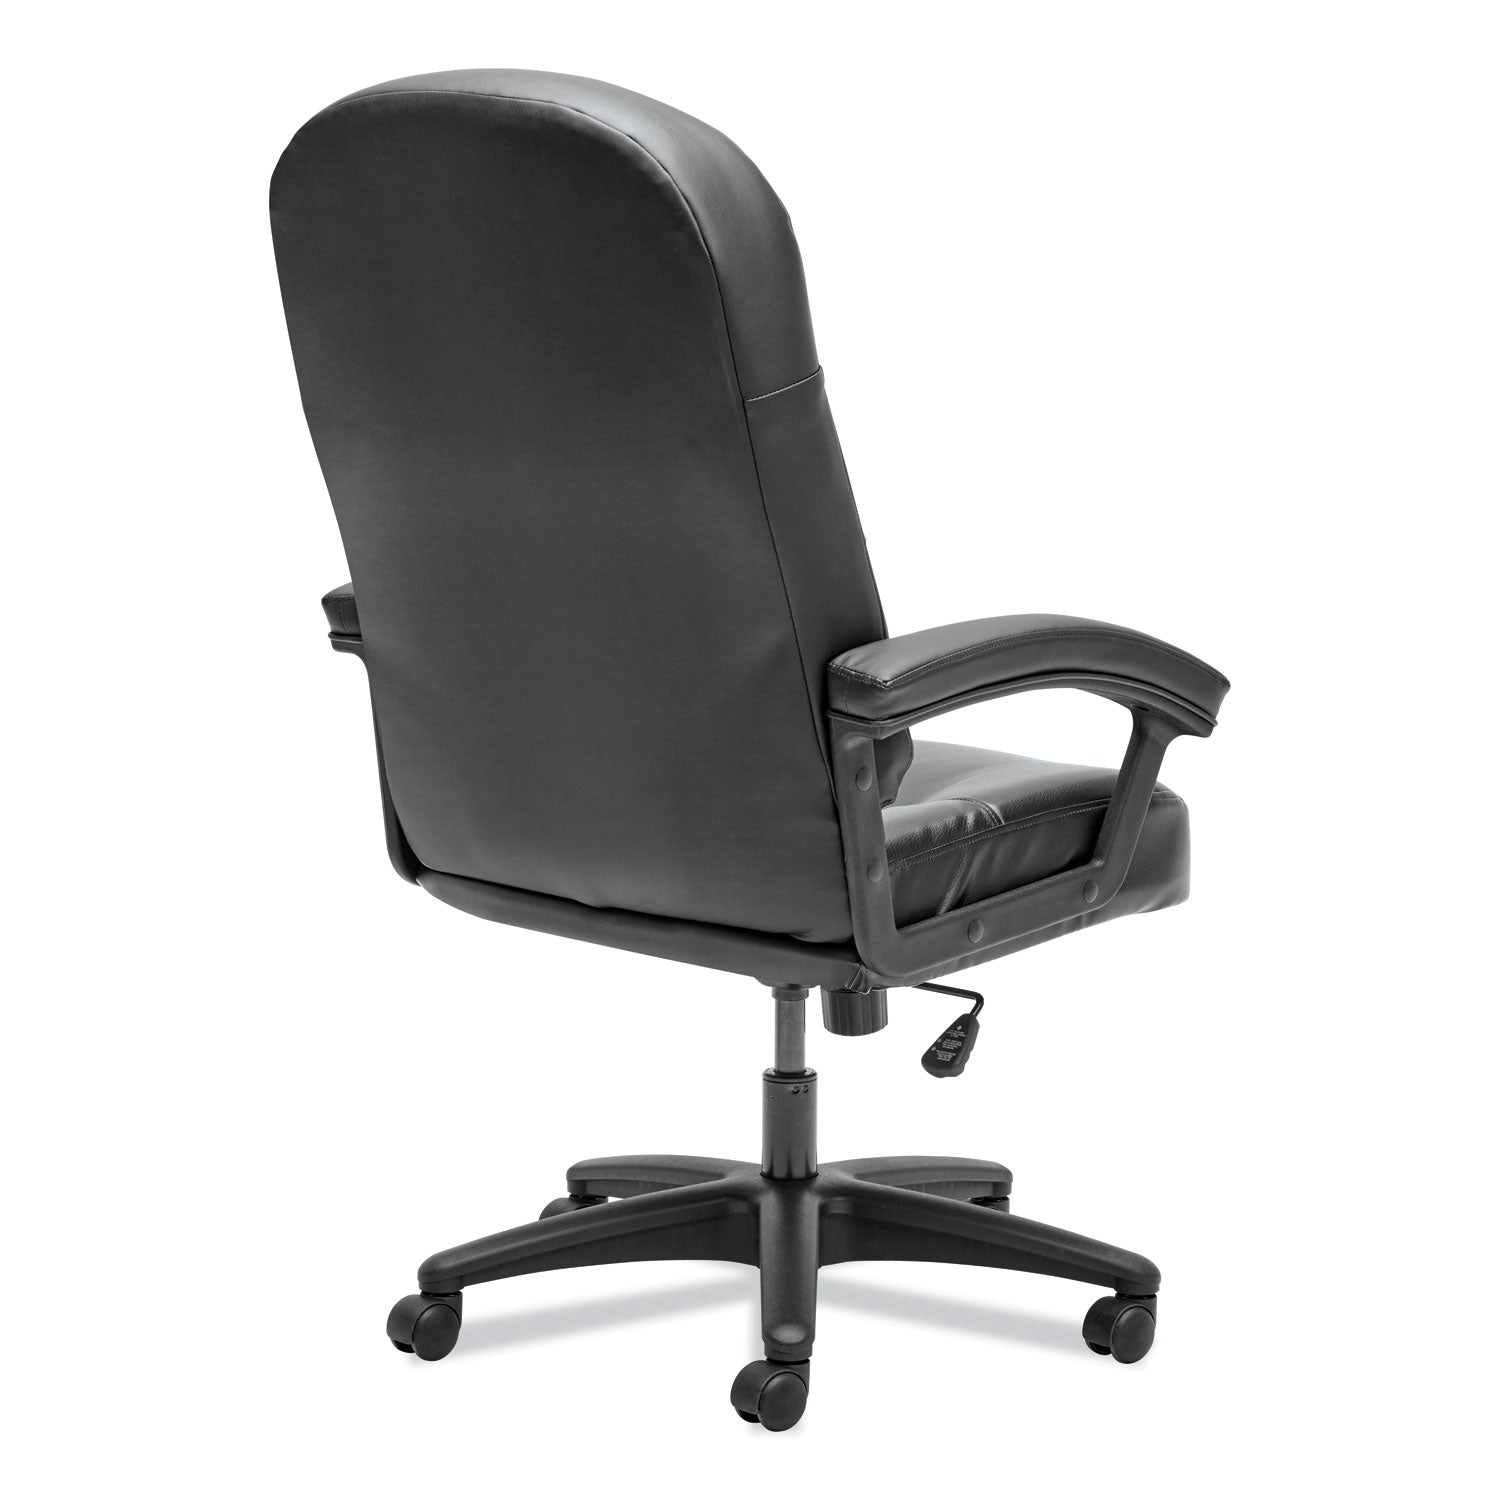 pillow-soft-2090-series-executive-high-back-swivel-tilt-chair-supports-up-to-250-lb-16-to-21-seat-height-black_hon2095hpwst11t - 4